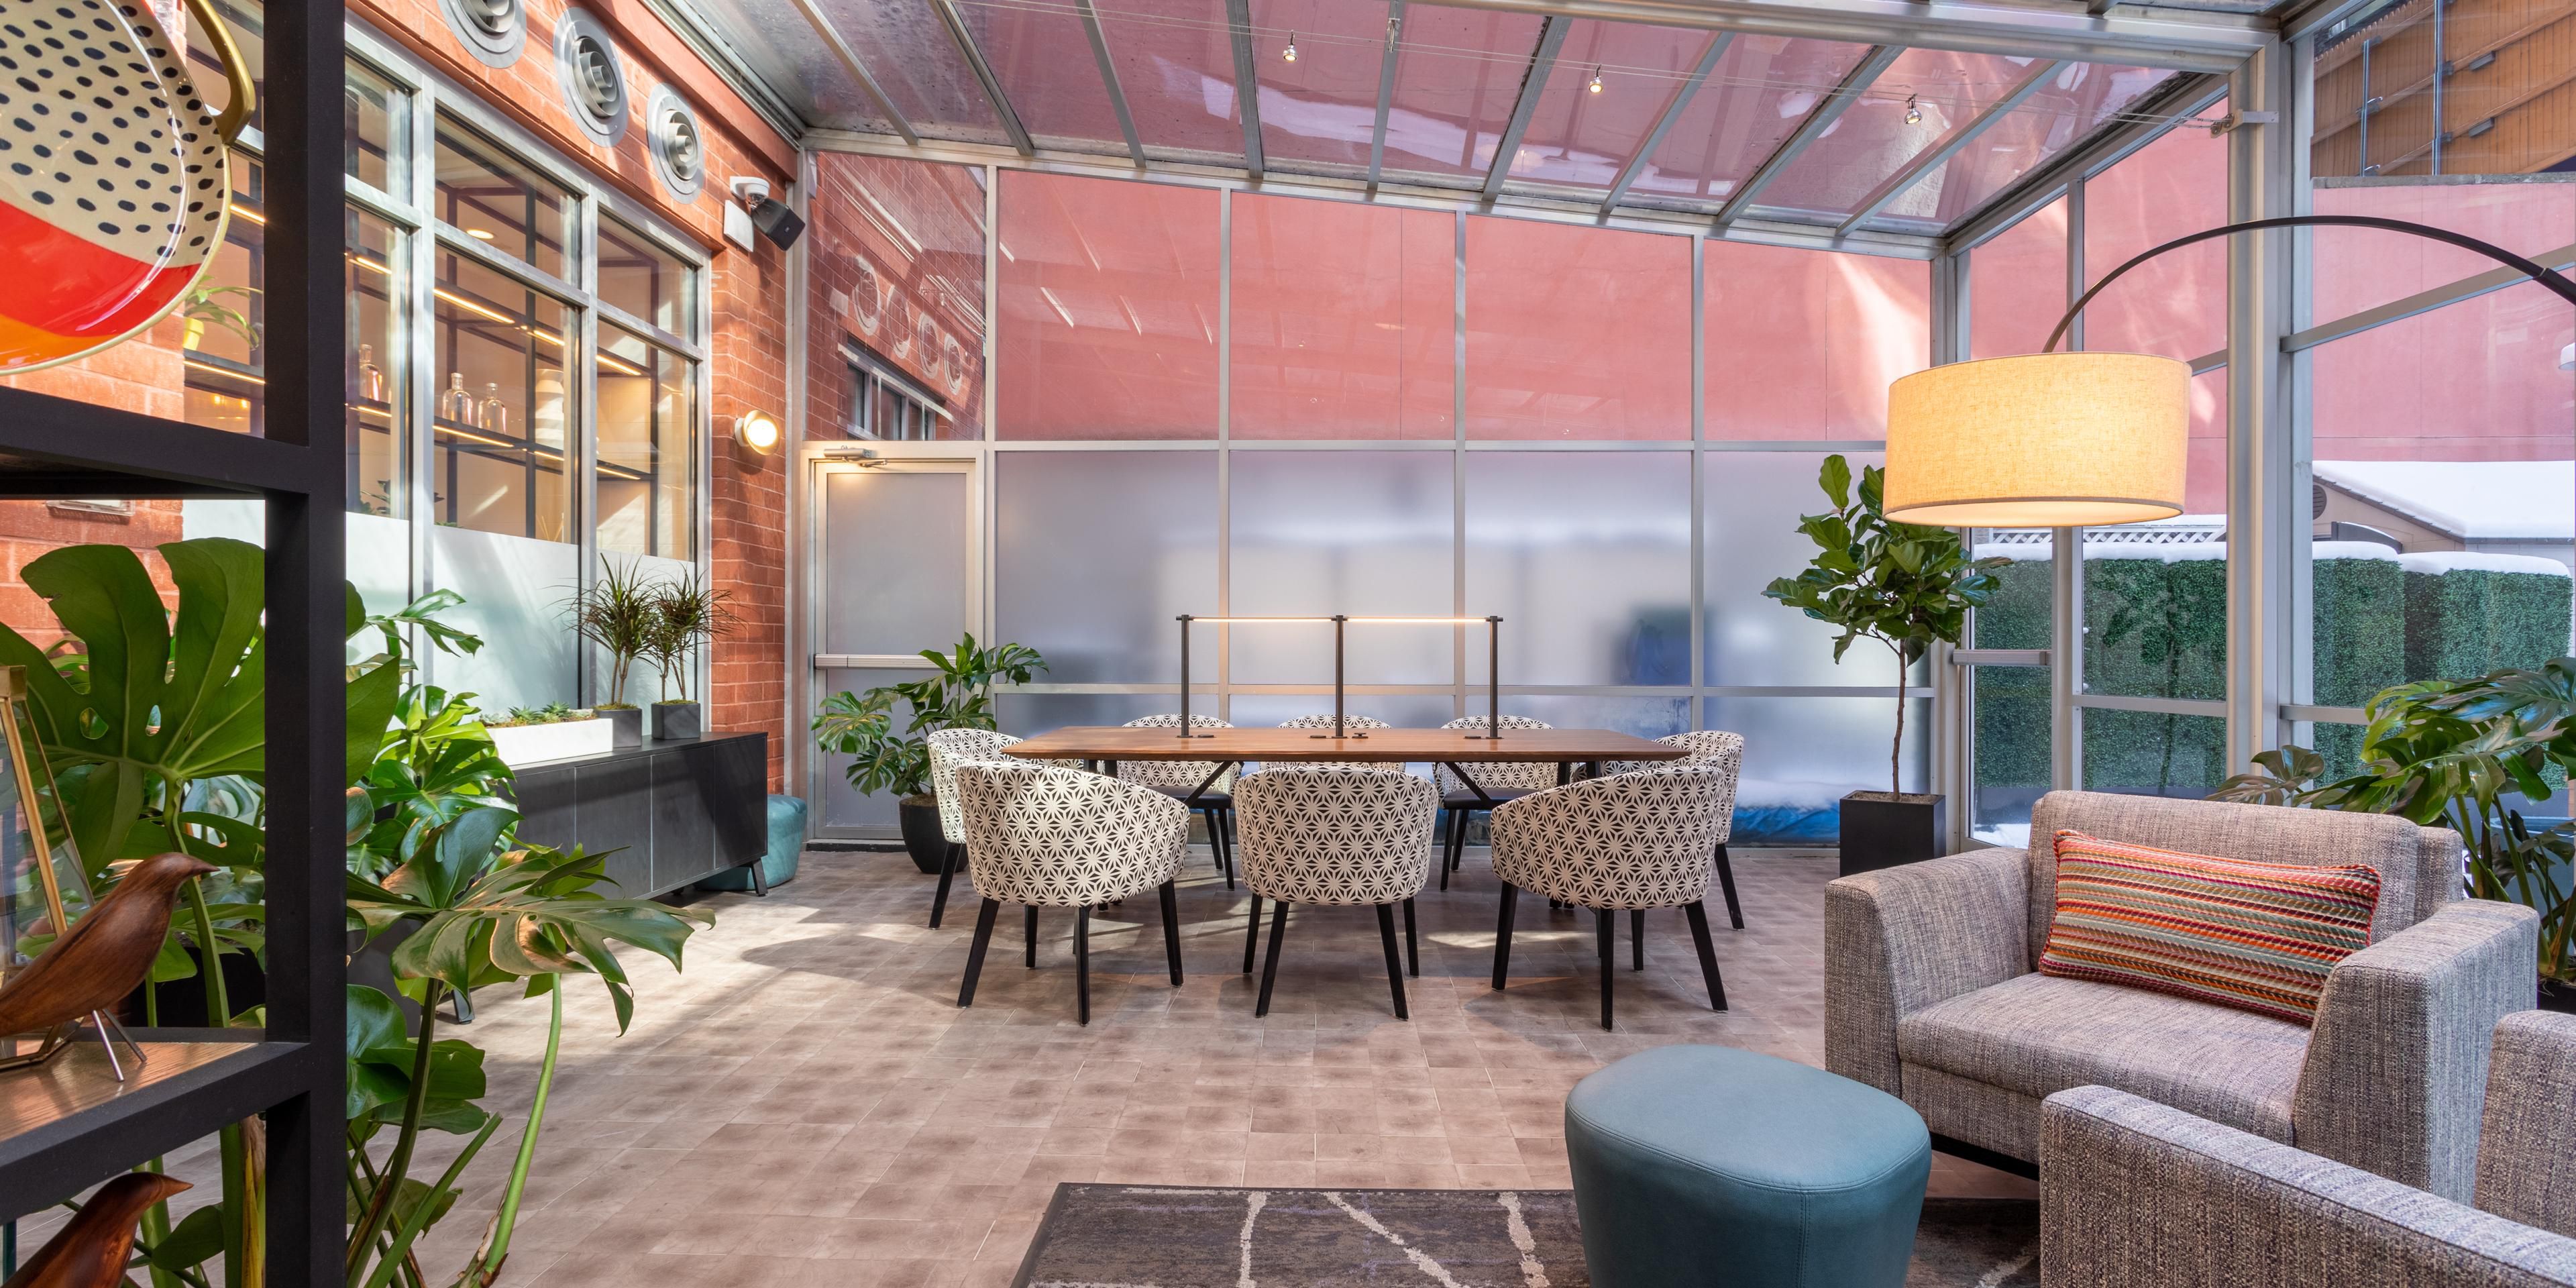 Guests enjoy the greenhouse, with cozy nooks and communal tables.